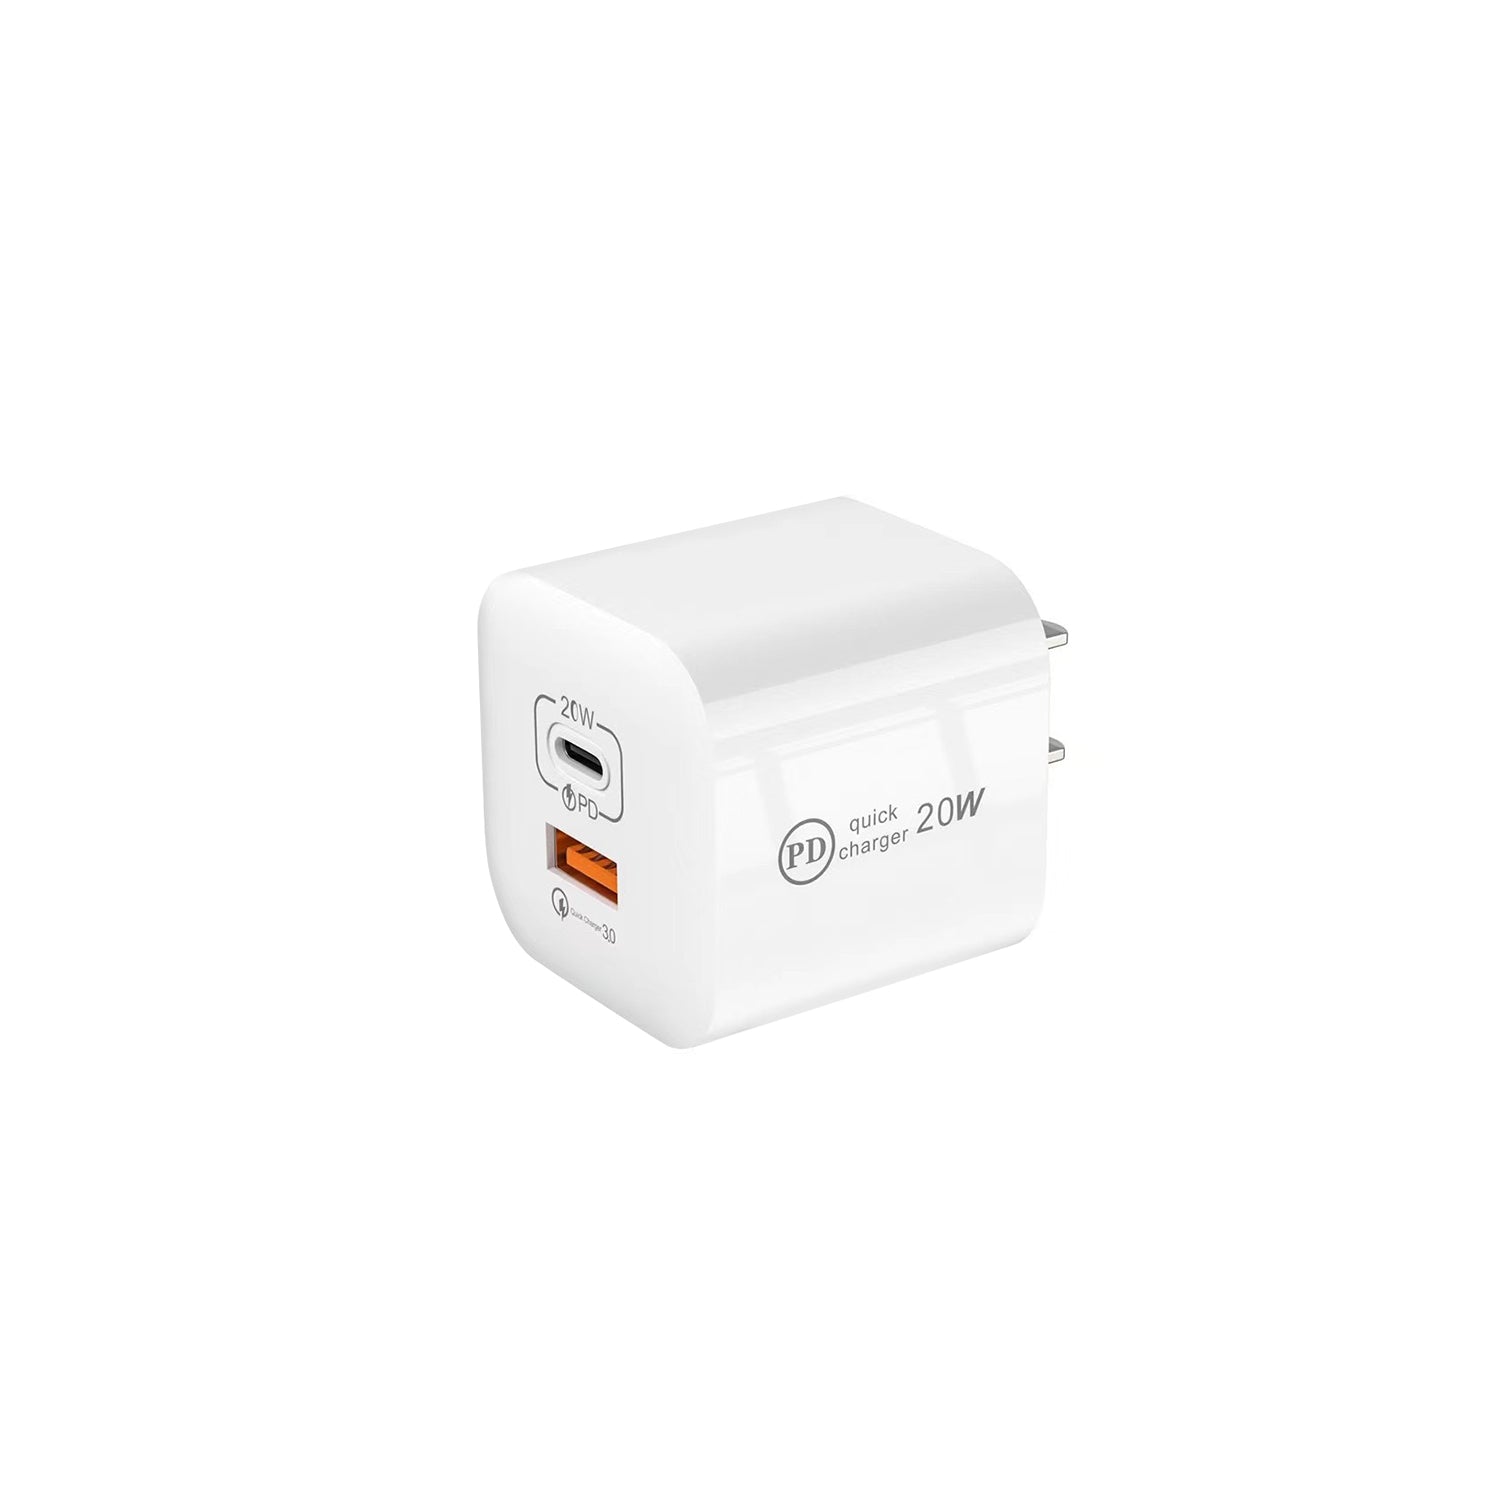 20W mini PD 2 port (USB 3.0 +PD) is used for quick chargers on other devices